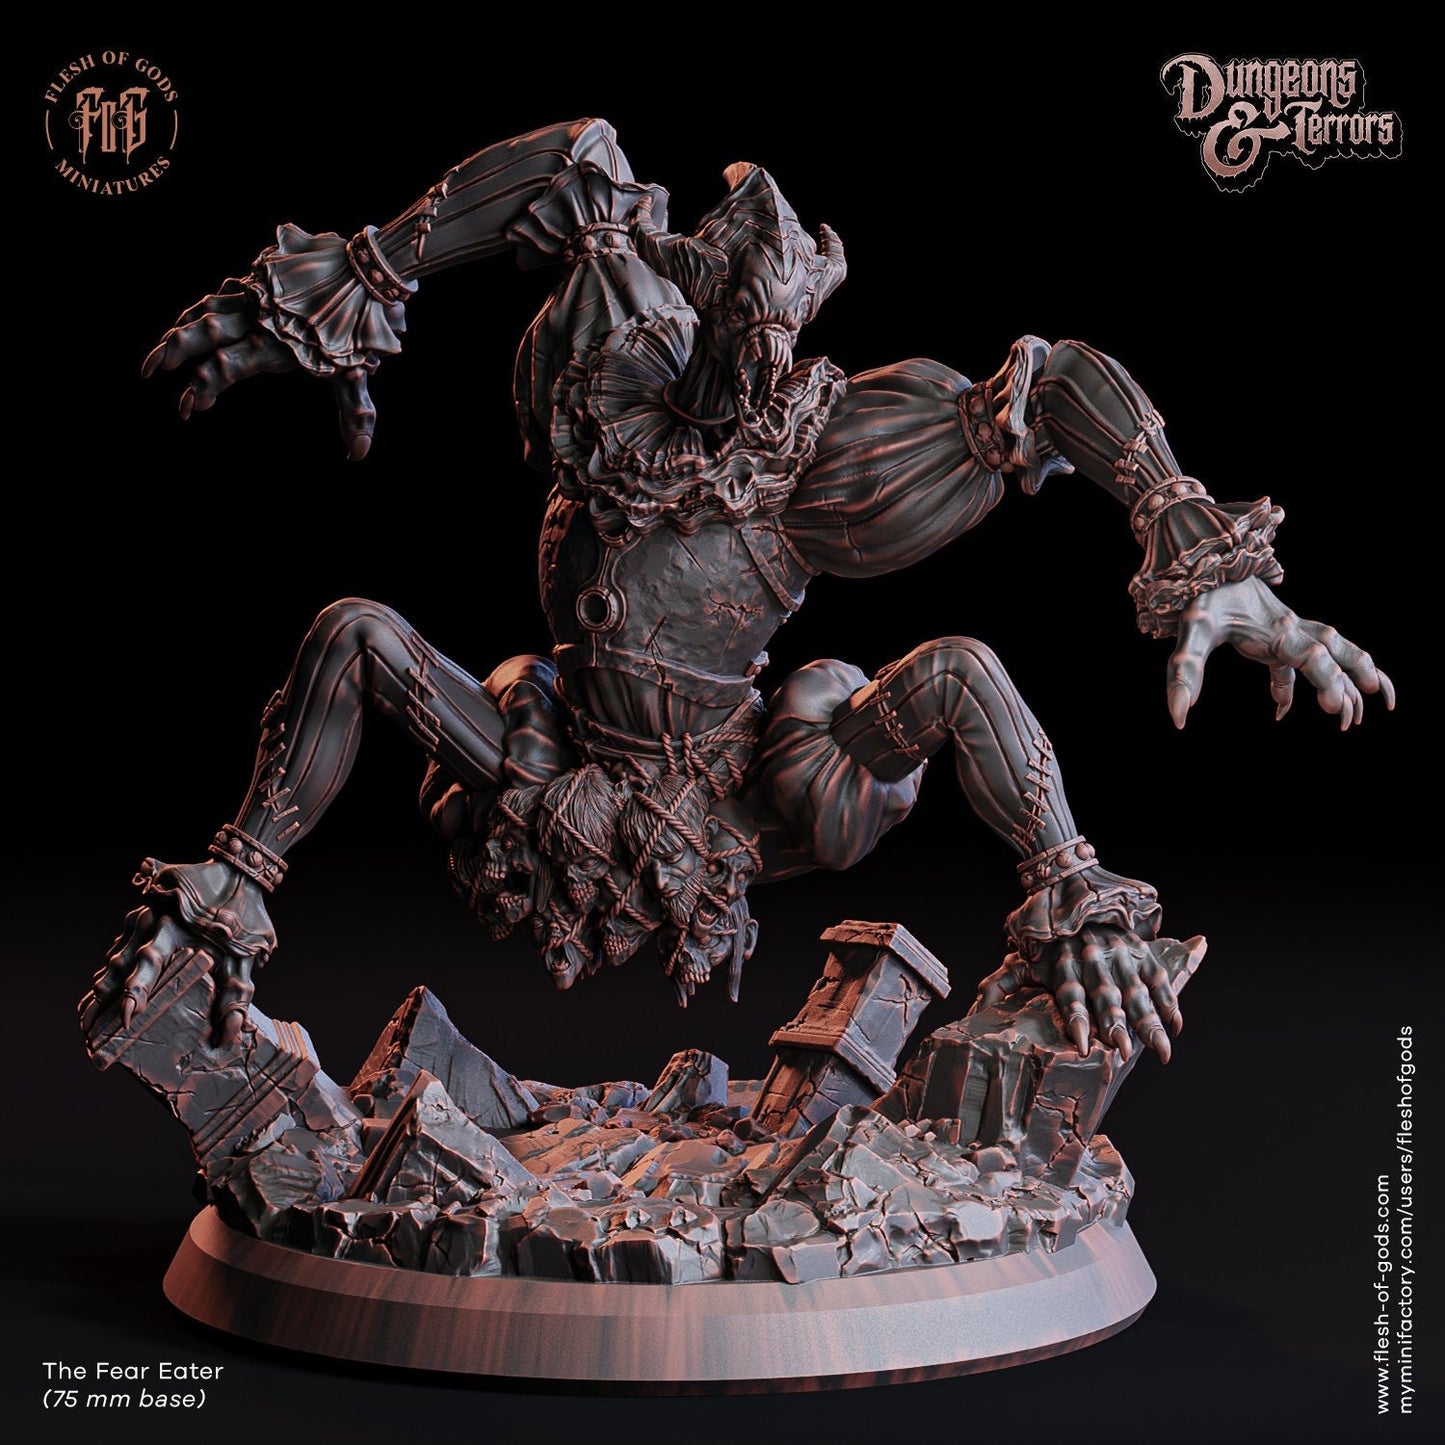 The Fear Eater | Flesh of Gods | Enemy | 3D Printed Resin Miniature | Dungeons and Dragons | Pathfinder | Tabletop Role Playing | D&D